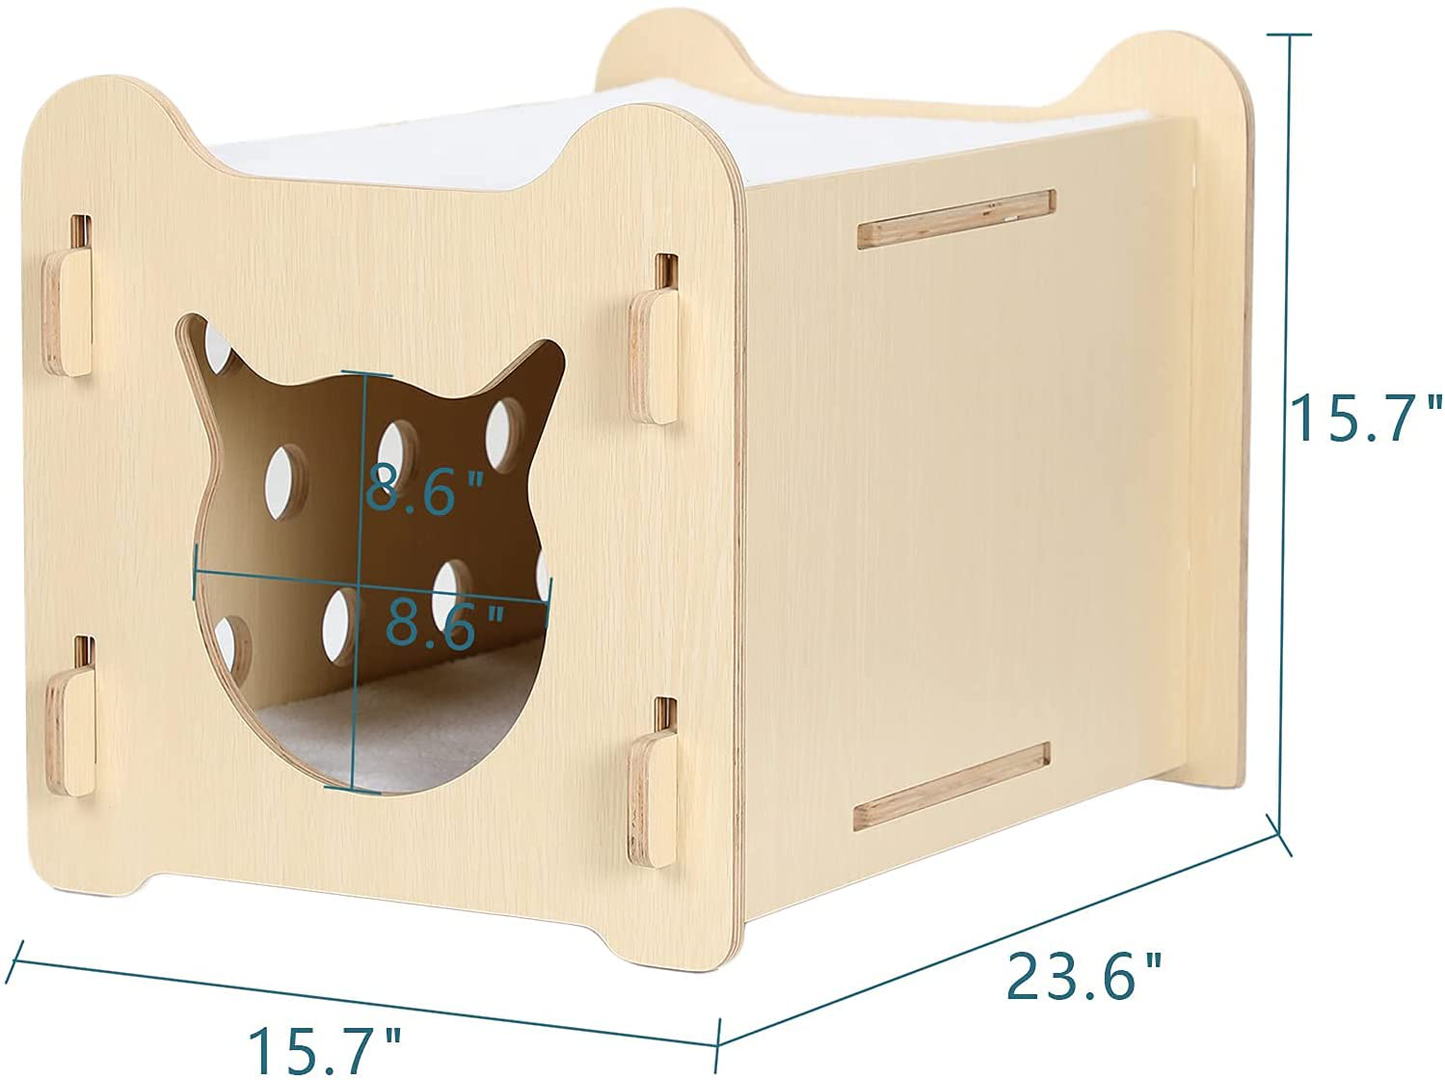 Petsfit Cat House Thicken Wood Indoor Cat Shape Door with Fleece Soft Cat Bed and Observation Hole